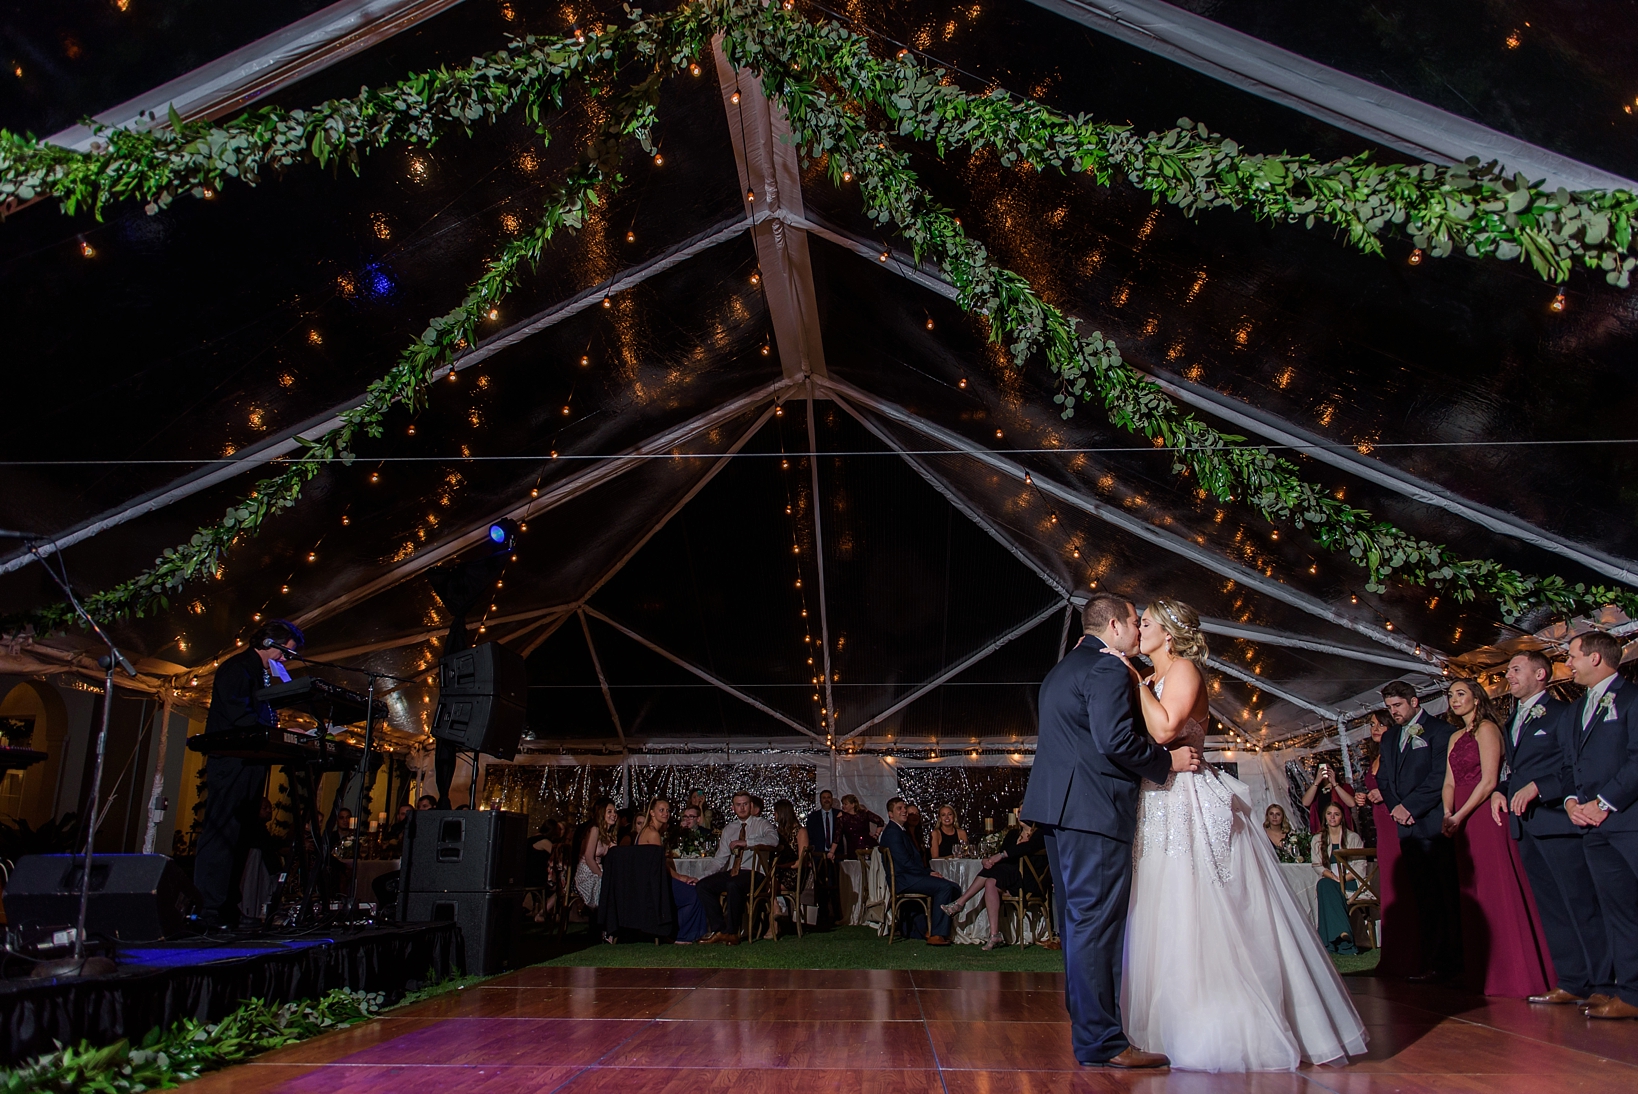 The end of the First Dance by the Bride and Groom under the Floral garland and string lights